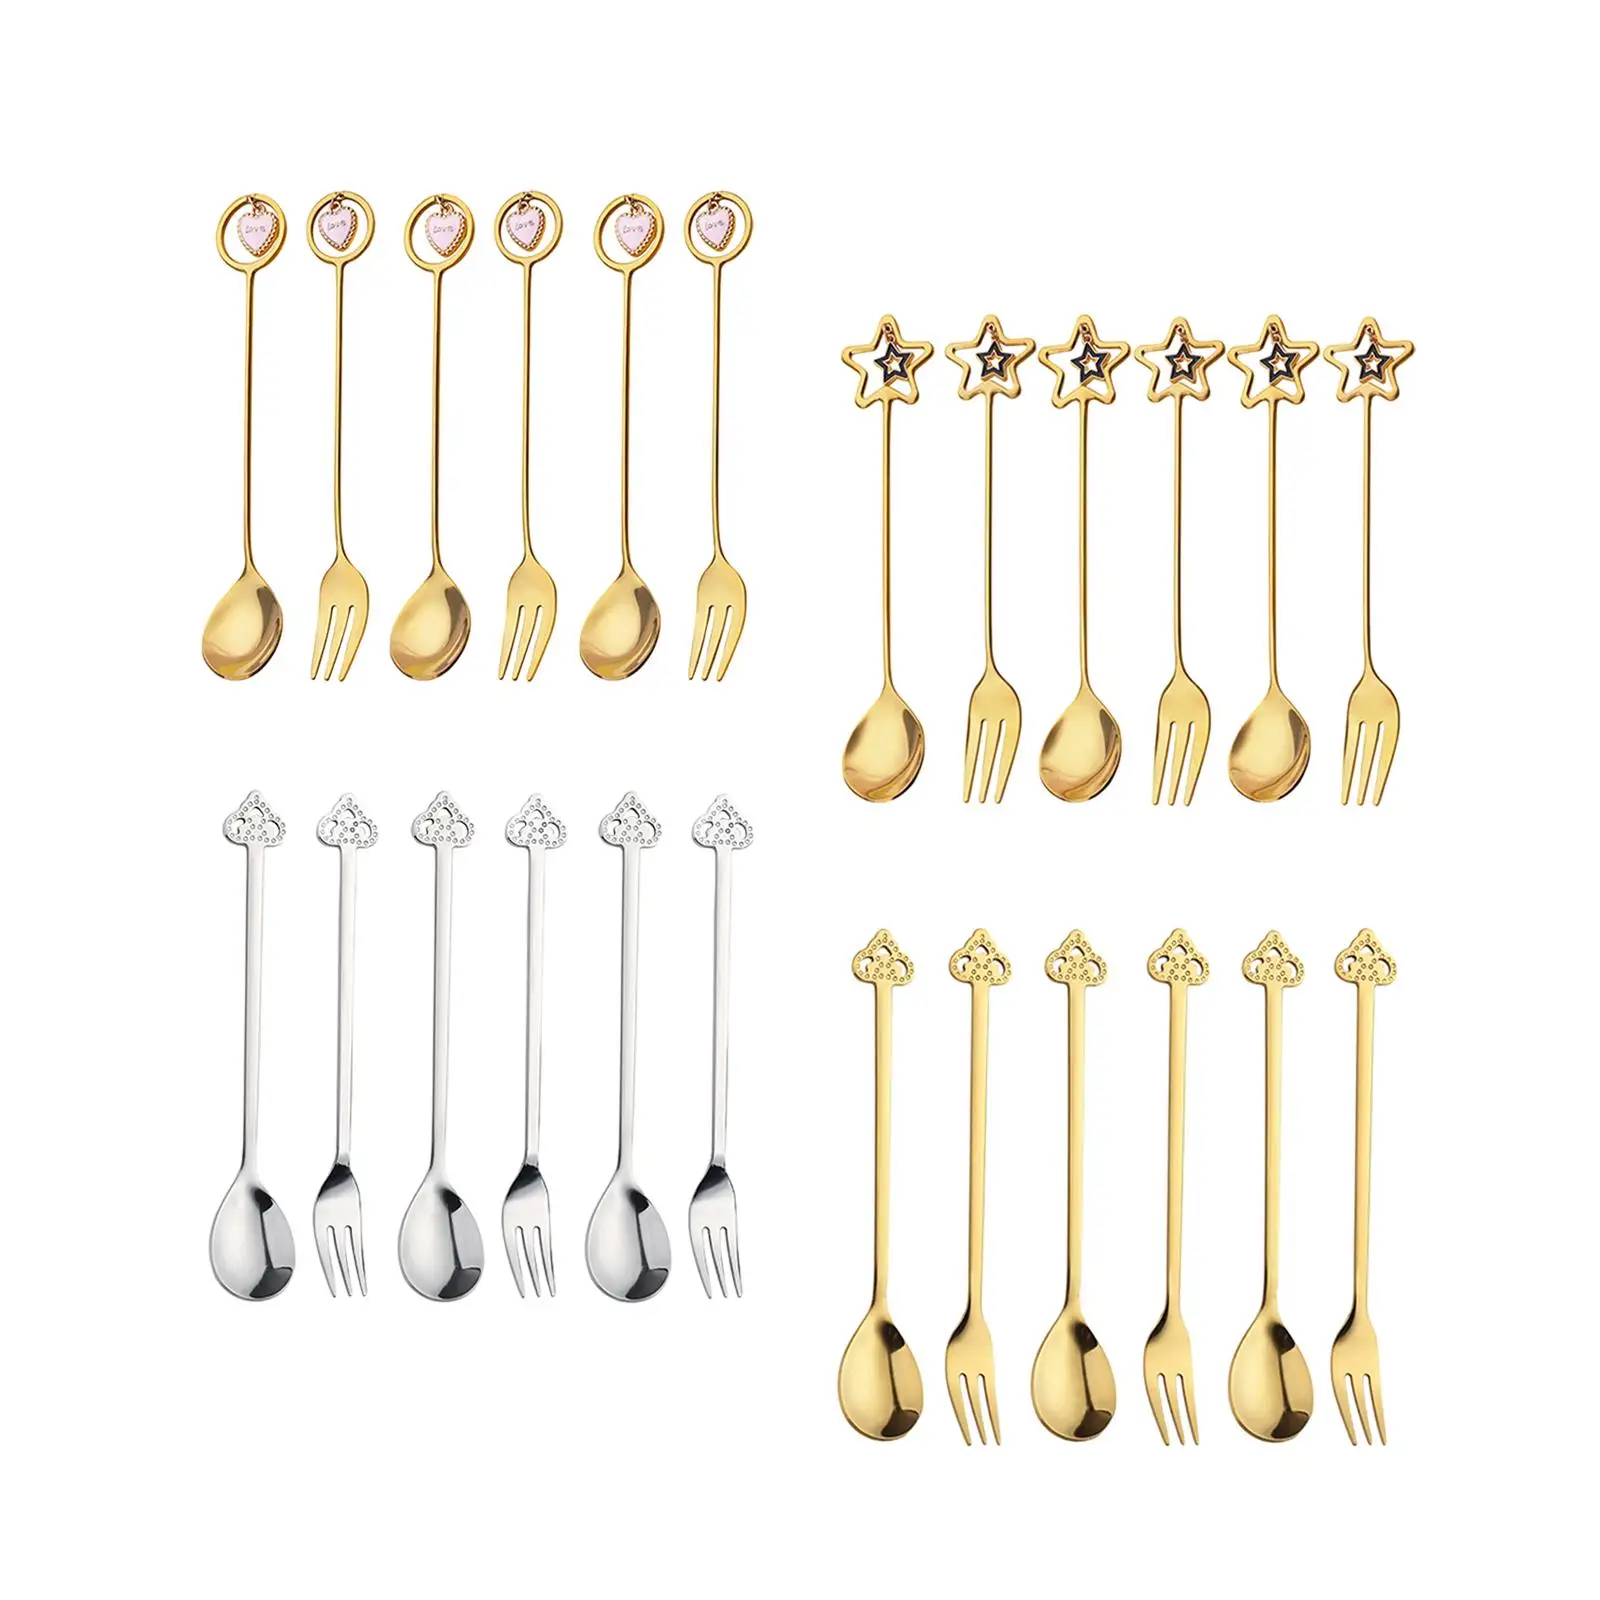 6Pcs Xmas Flatware Dessert Forks Coffee Stirring Spoon Stainless Steel Spoon Fork for Daily Use Restaurant Wedding Holiday